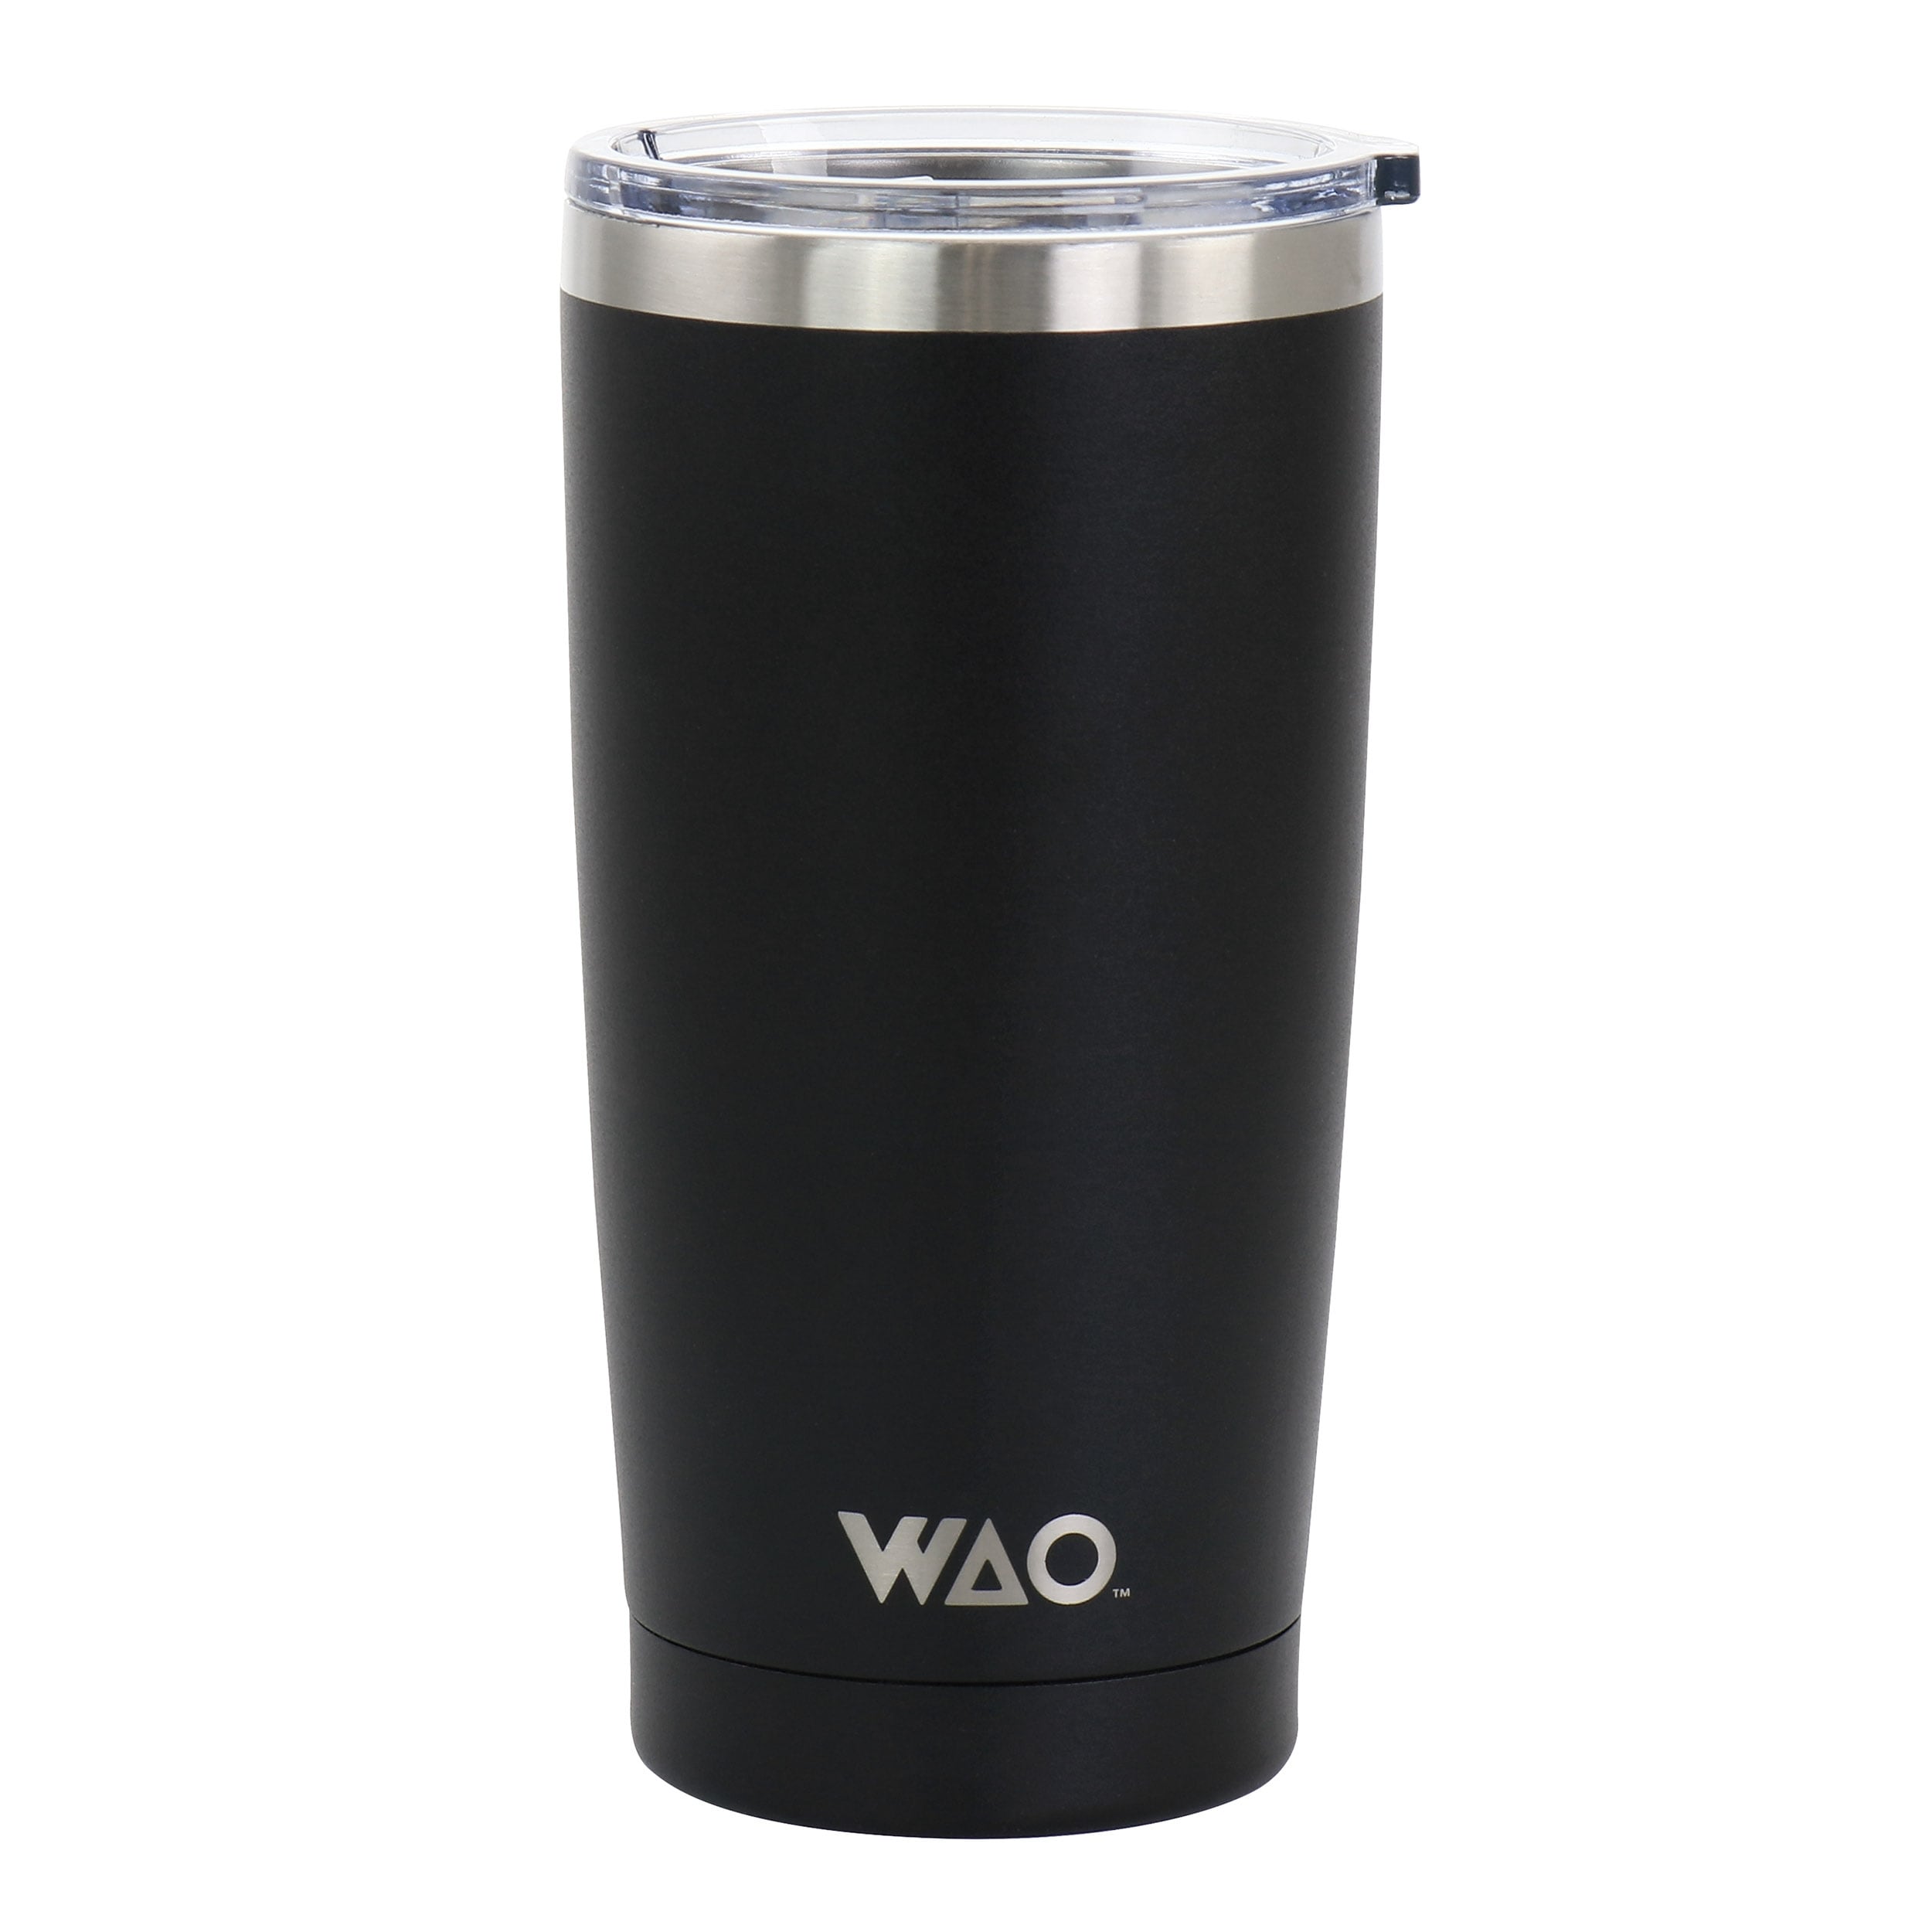 https://ak1.ostkcdn.com/images/products/is/images/direct/bf6463326df2a4489000942b9892761e6a53642d/WAO-18oz-Thermal-Tumbler-with-Acrylic-Lid-in-Matte-Black.jpg